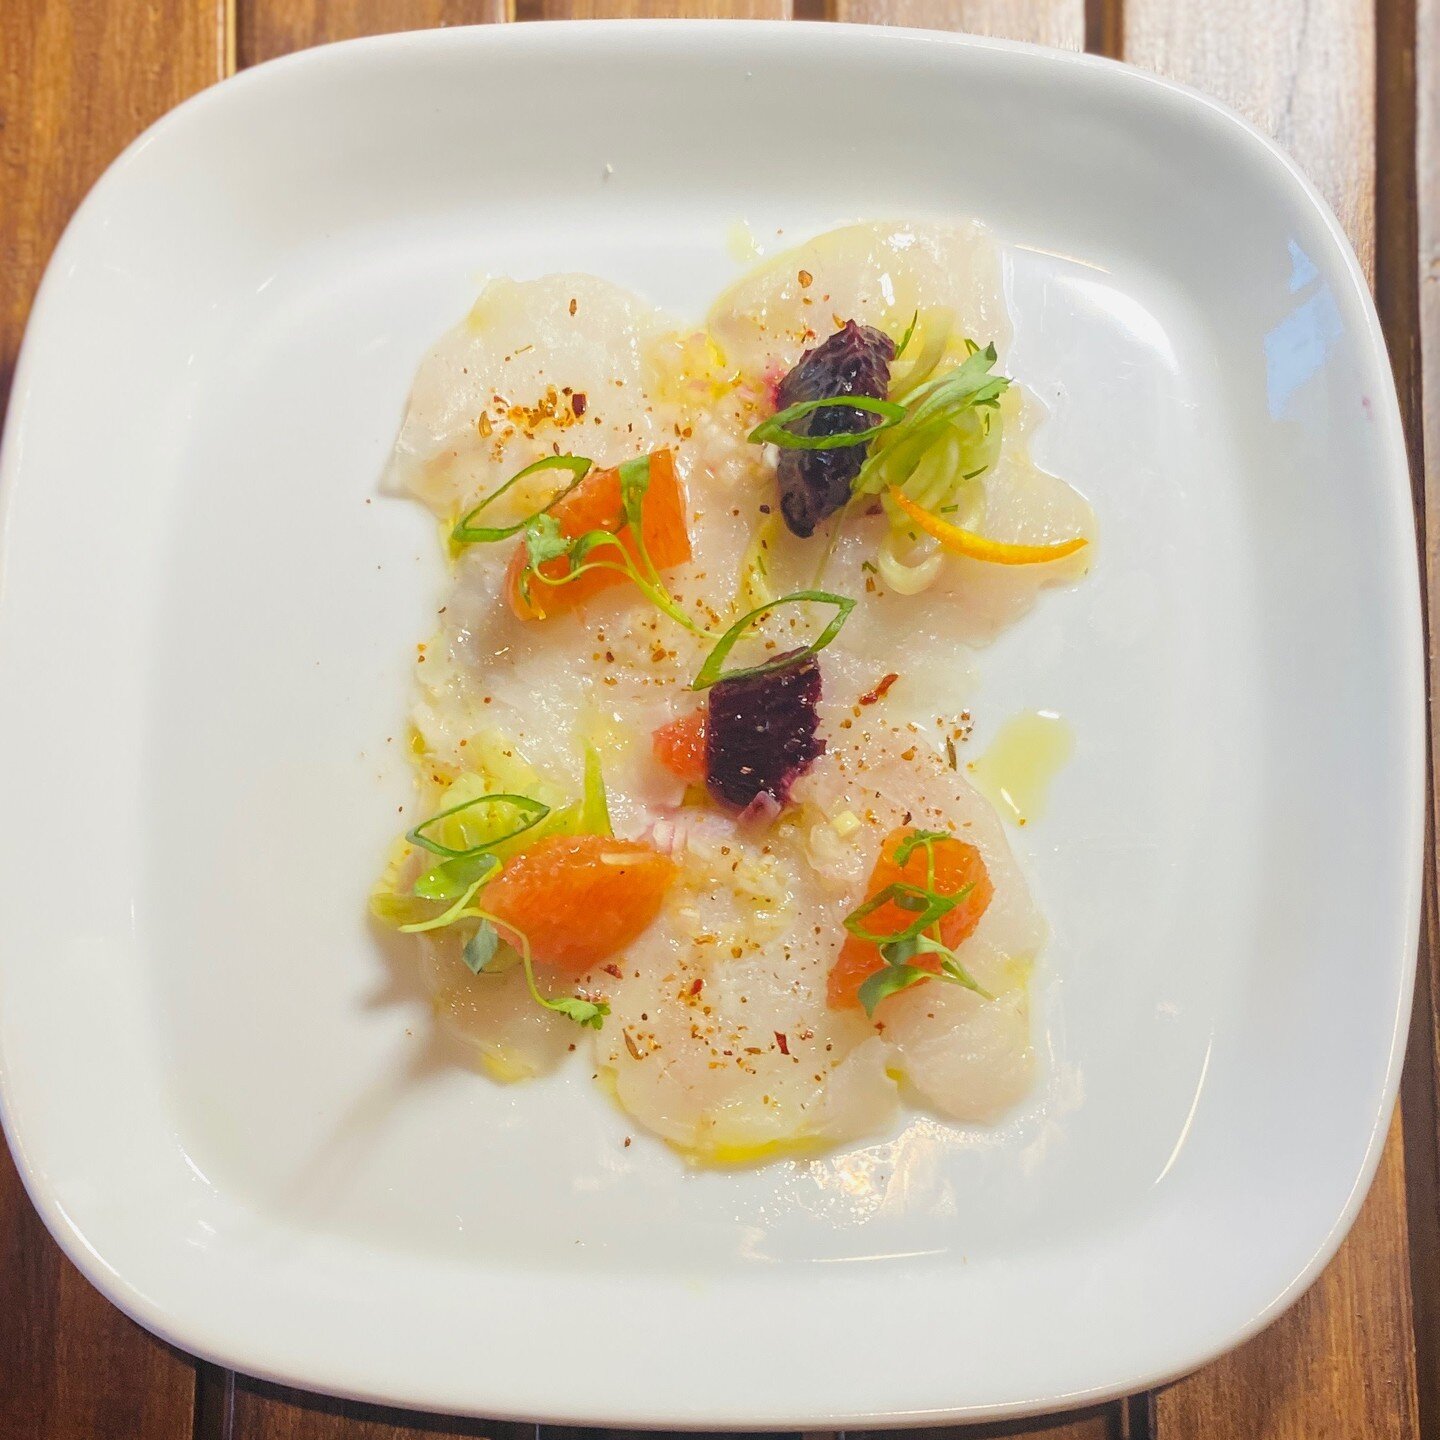 Nothing says summer is almost here like a fresh seafood crudo! What is your favorite summer seafood dish? #summertime2023